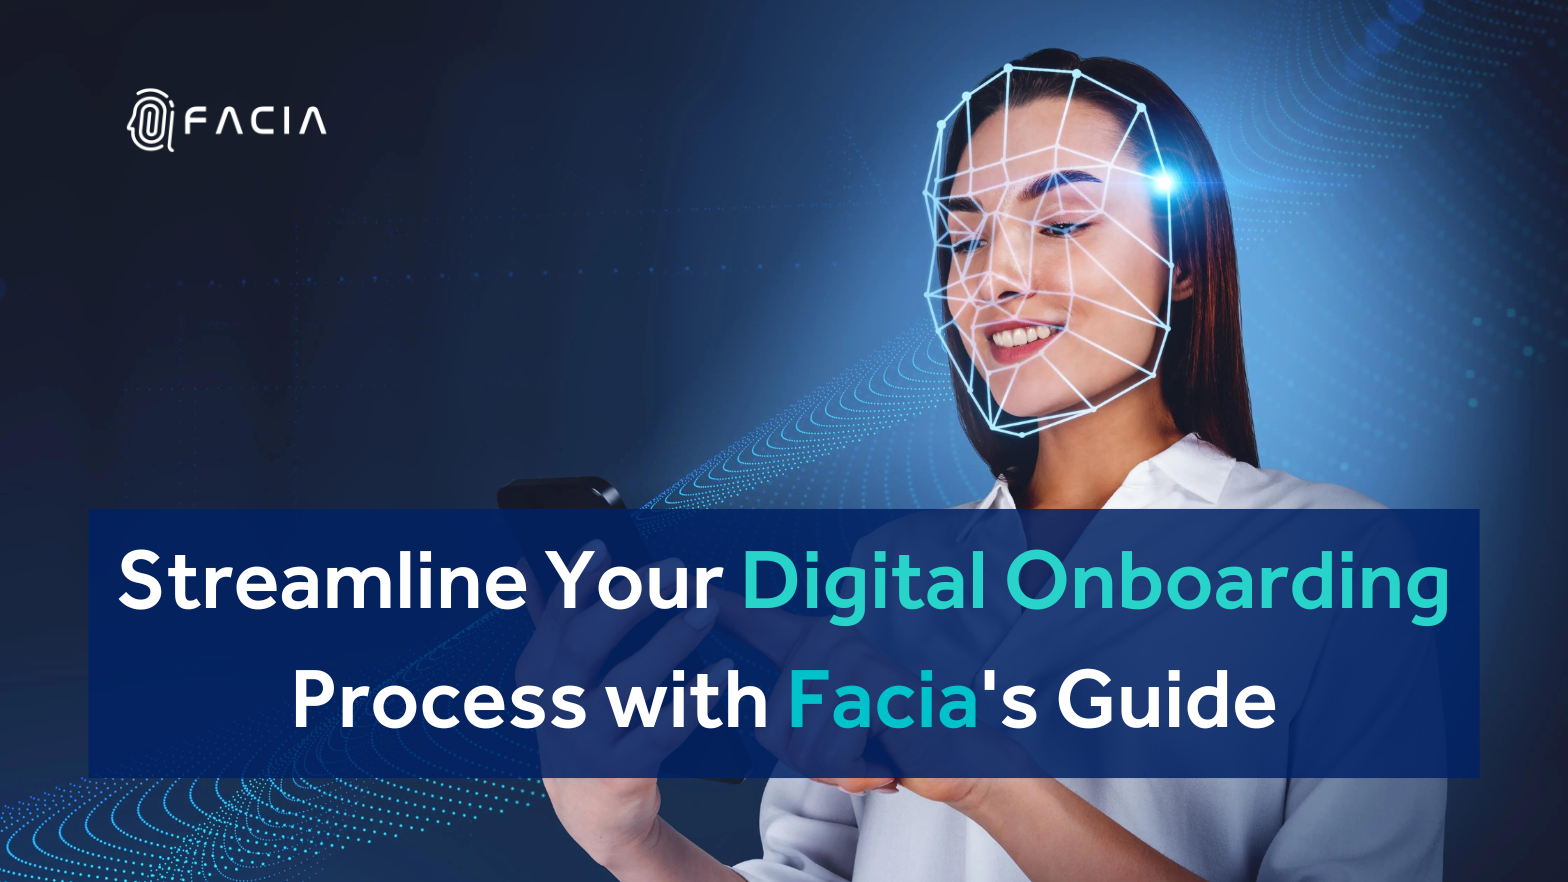 Customer undergoing onboarding process with Facia's facial recognition technology